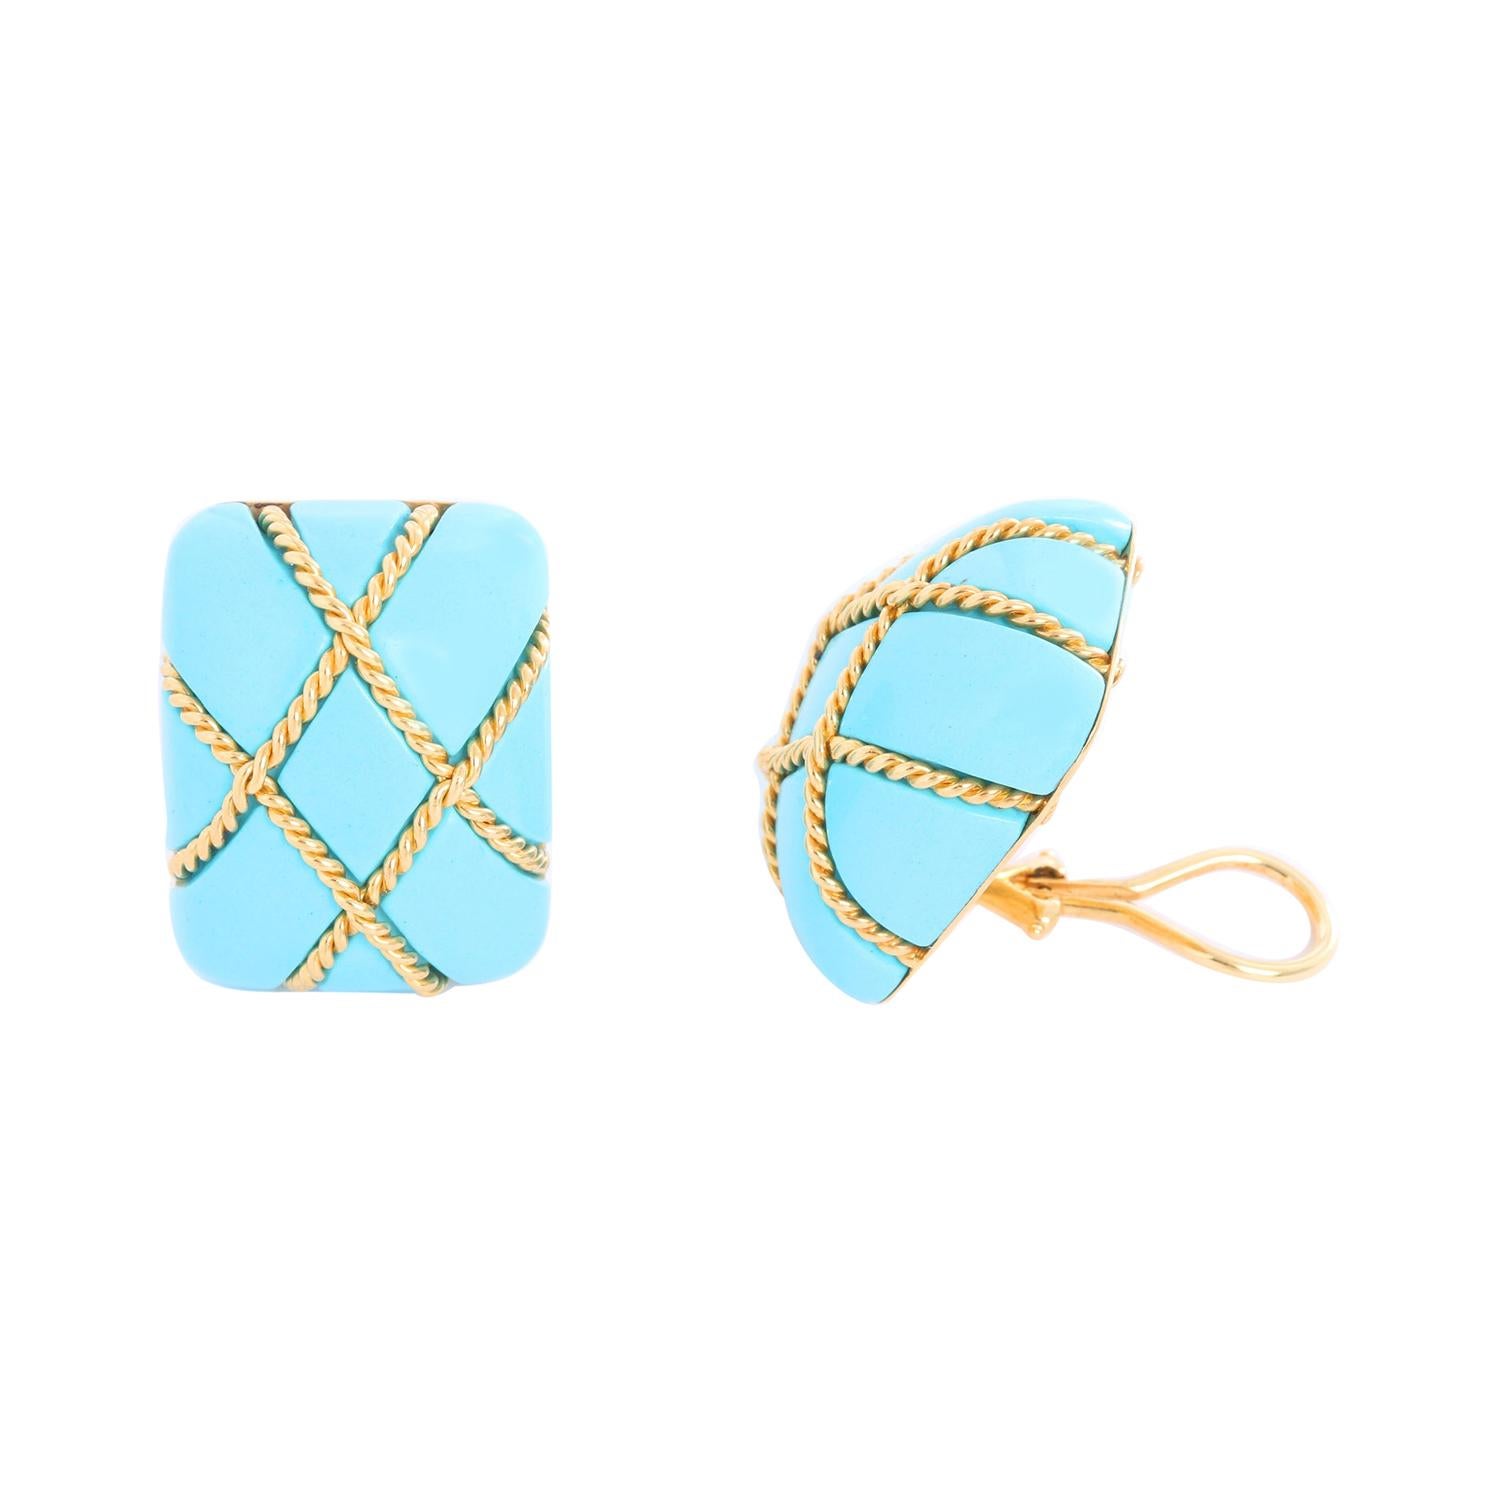 Seaman Schepps 18K Large Square Cage Turquoise Earrings